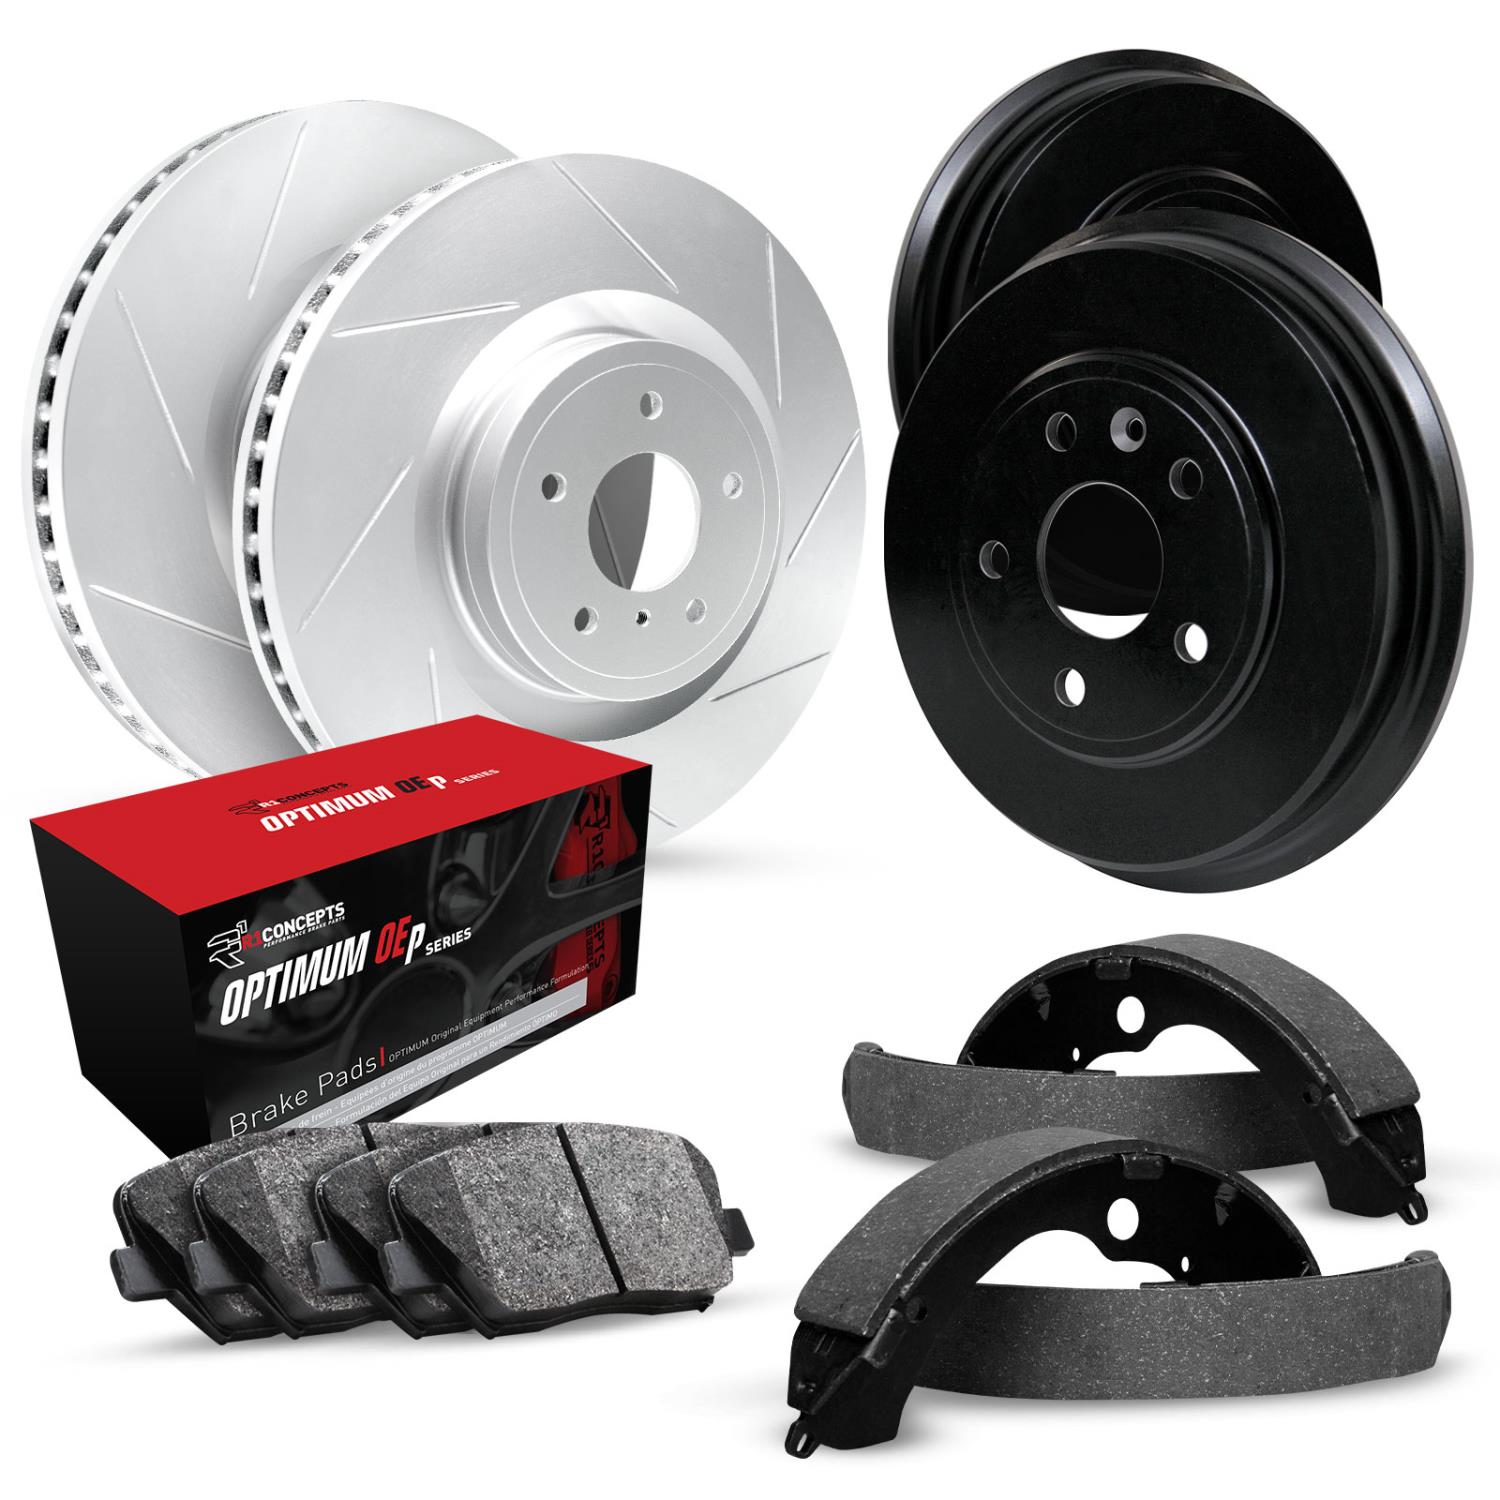 GEO-Carbon Slotted Brake Rotor & Drum Set w/Optimum OE Pads & Shoes, 1971-1975 GM, Position: Front & Rear